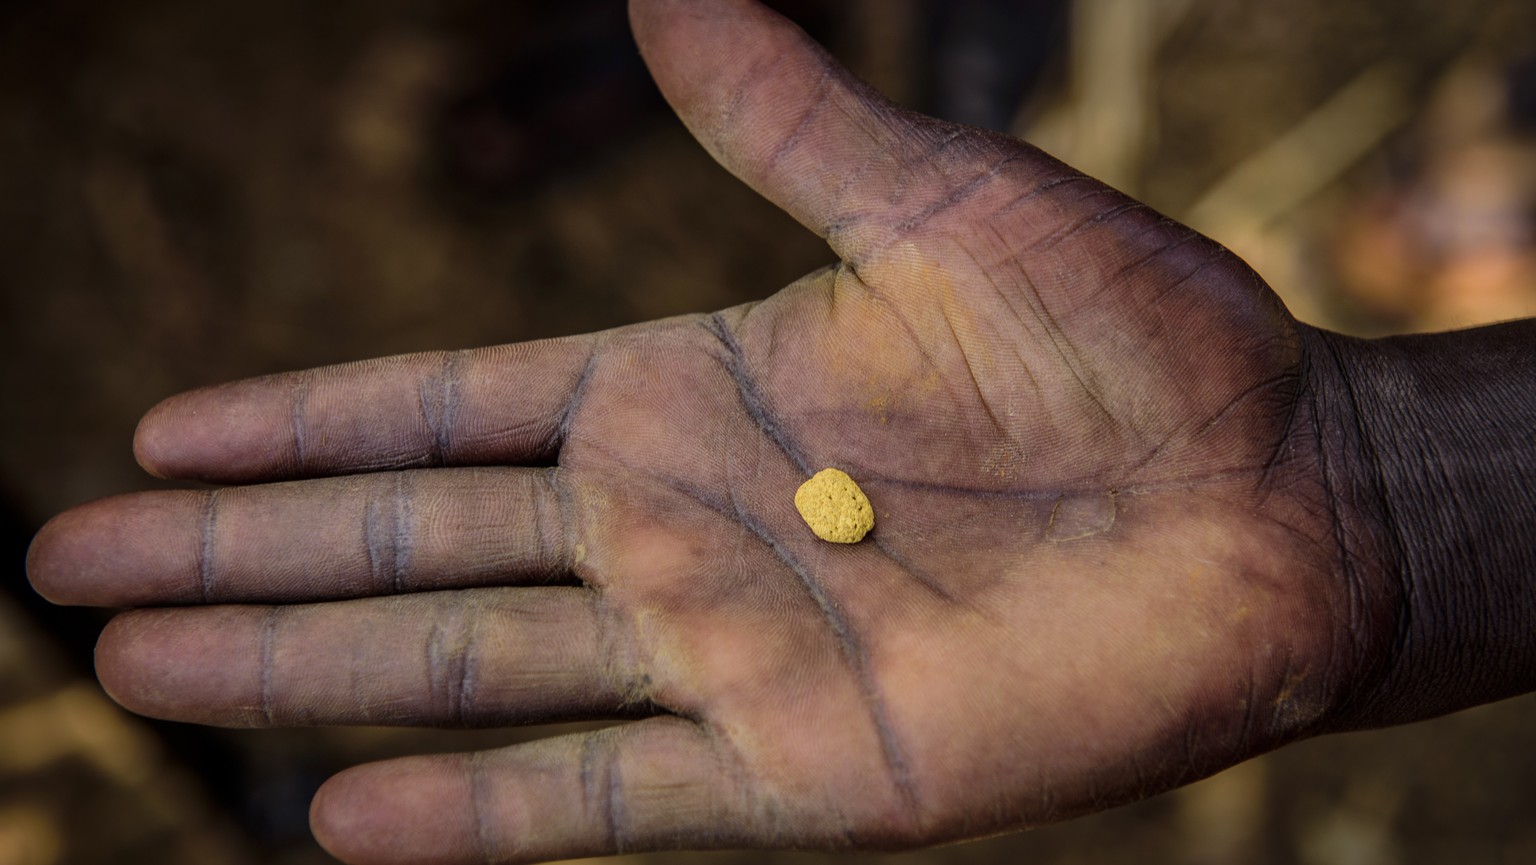 A man displays a nugget containing gold dust at a gold mining site in the village of Mawero, on the outskirts of Busia town, in eastern Uganda on Monday, Oct. 18, 2021. With schools closed, students t ...